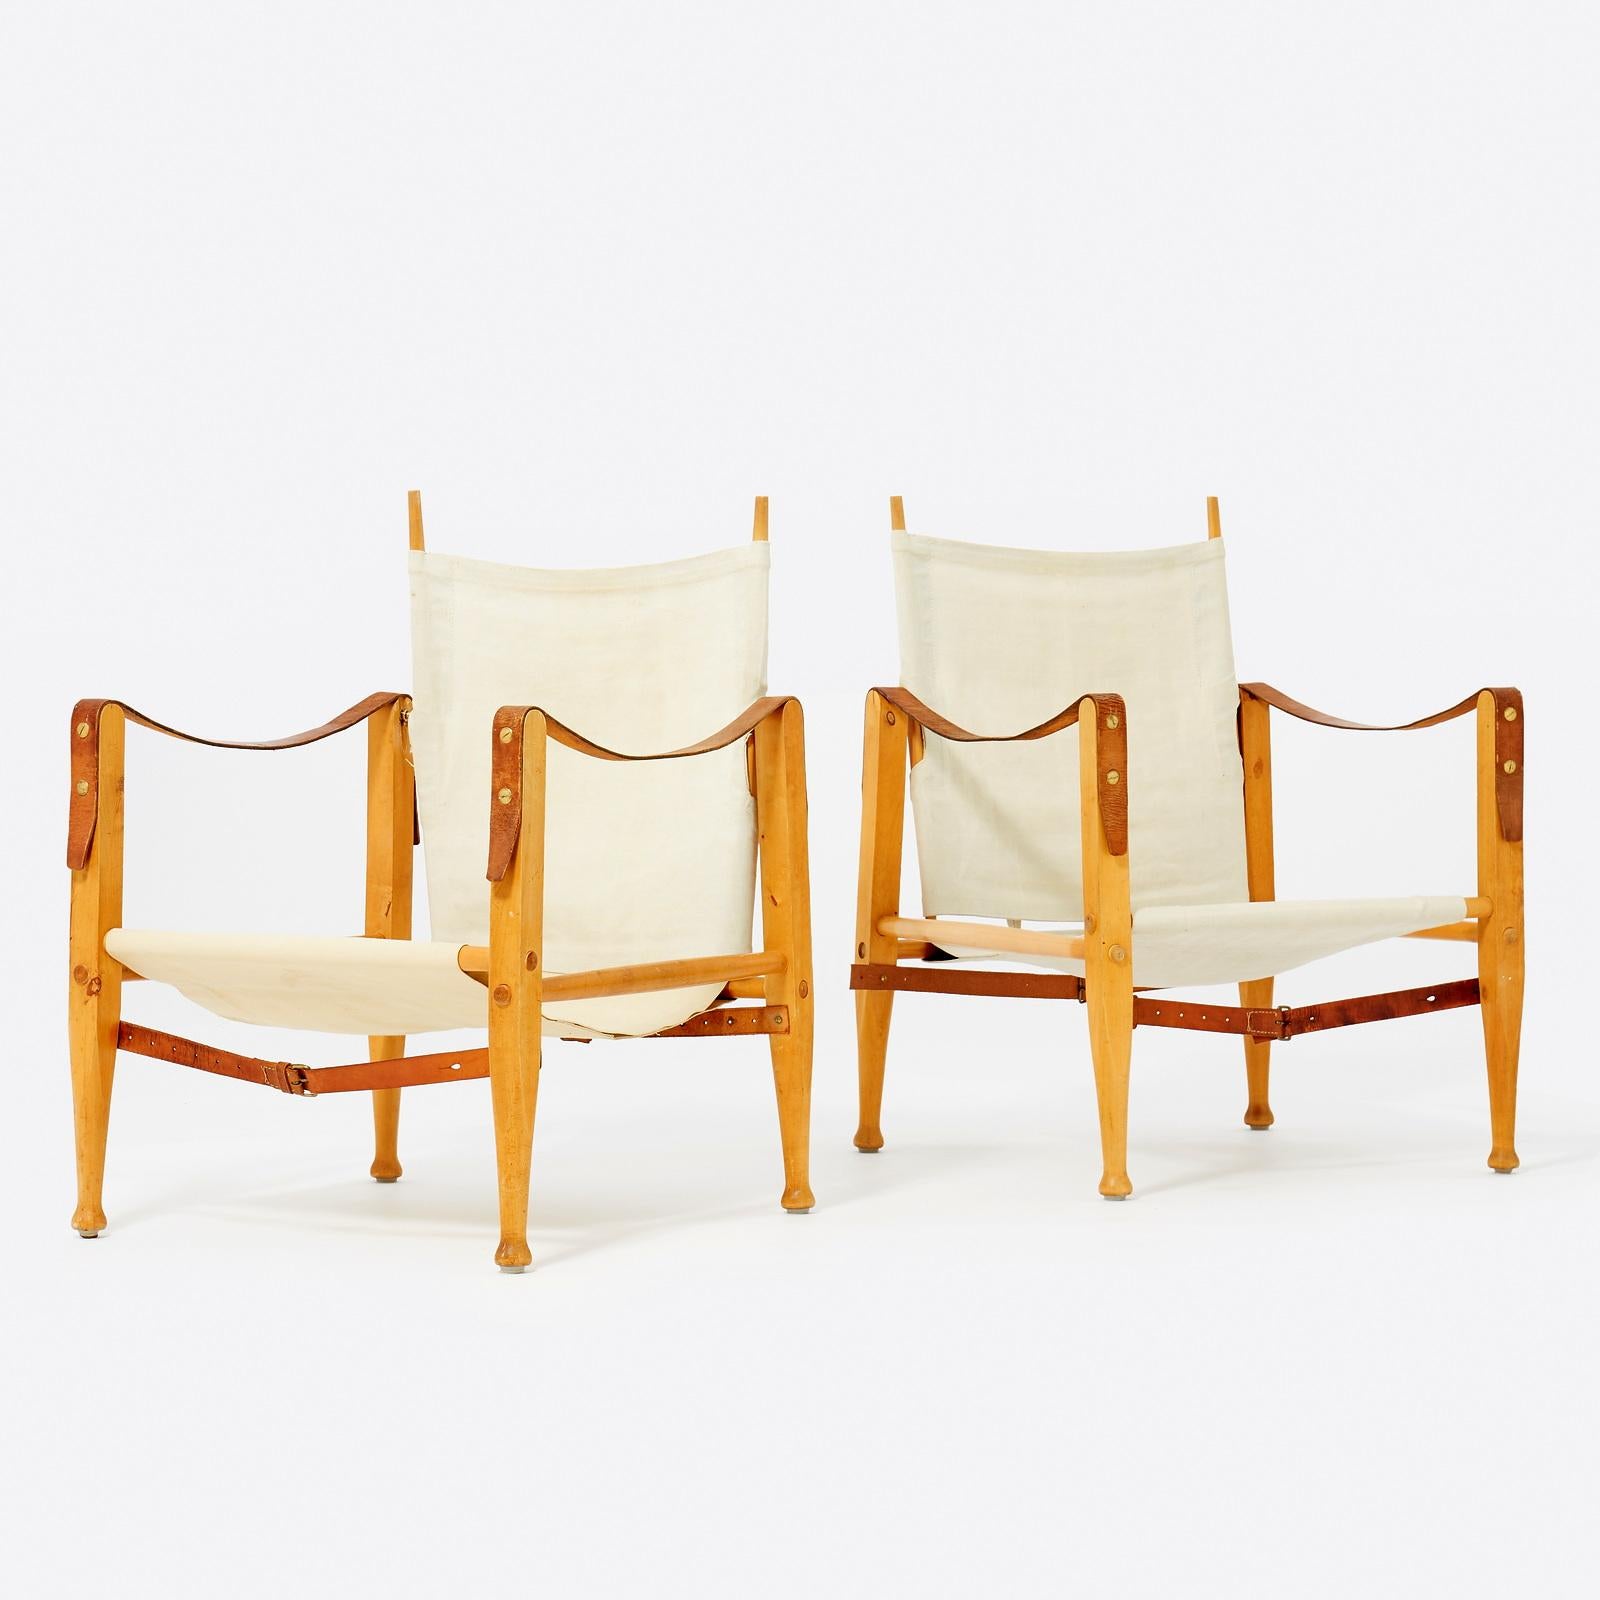 Lovely pair ‘Safari’ model 4700 easy chairs by Kaare Klint for Rud Rasmussen, Denmark 1950s. This set features a frame made out of stained oak with leather straps. Frame in oak with seat, back, and armrests in canvas. 
58x58x80 cm.
The model was